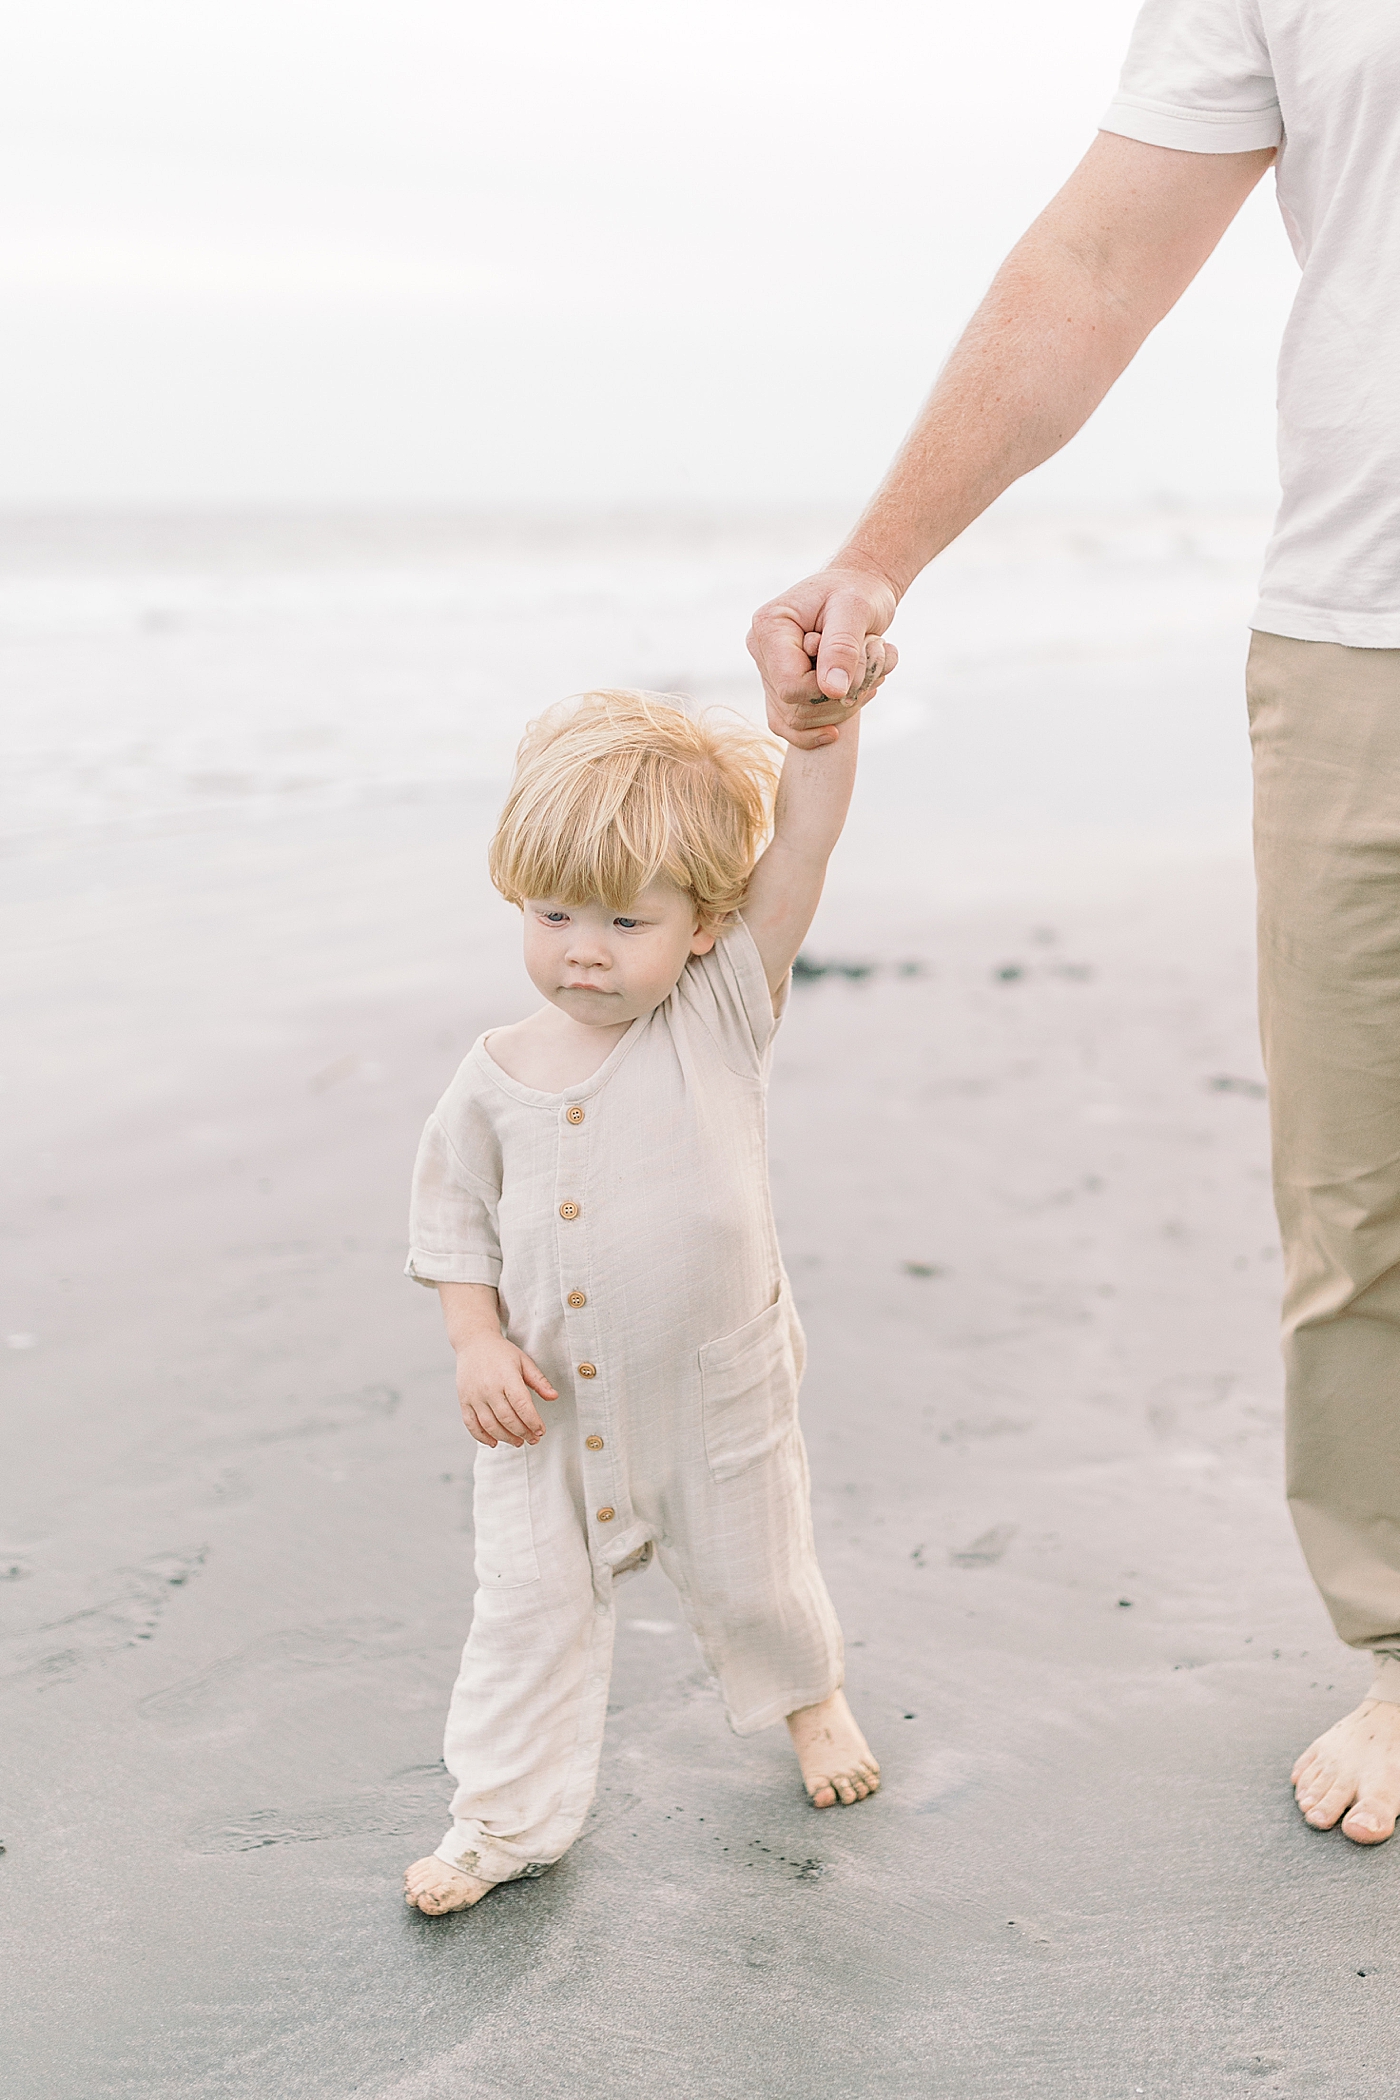 Dad holding baby boys hand during fall family session at beach | Photo by Caitlyn Motycka Photography